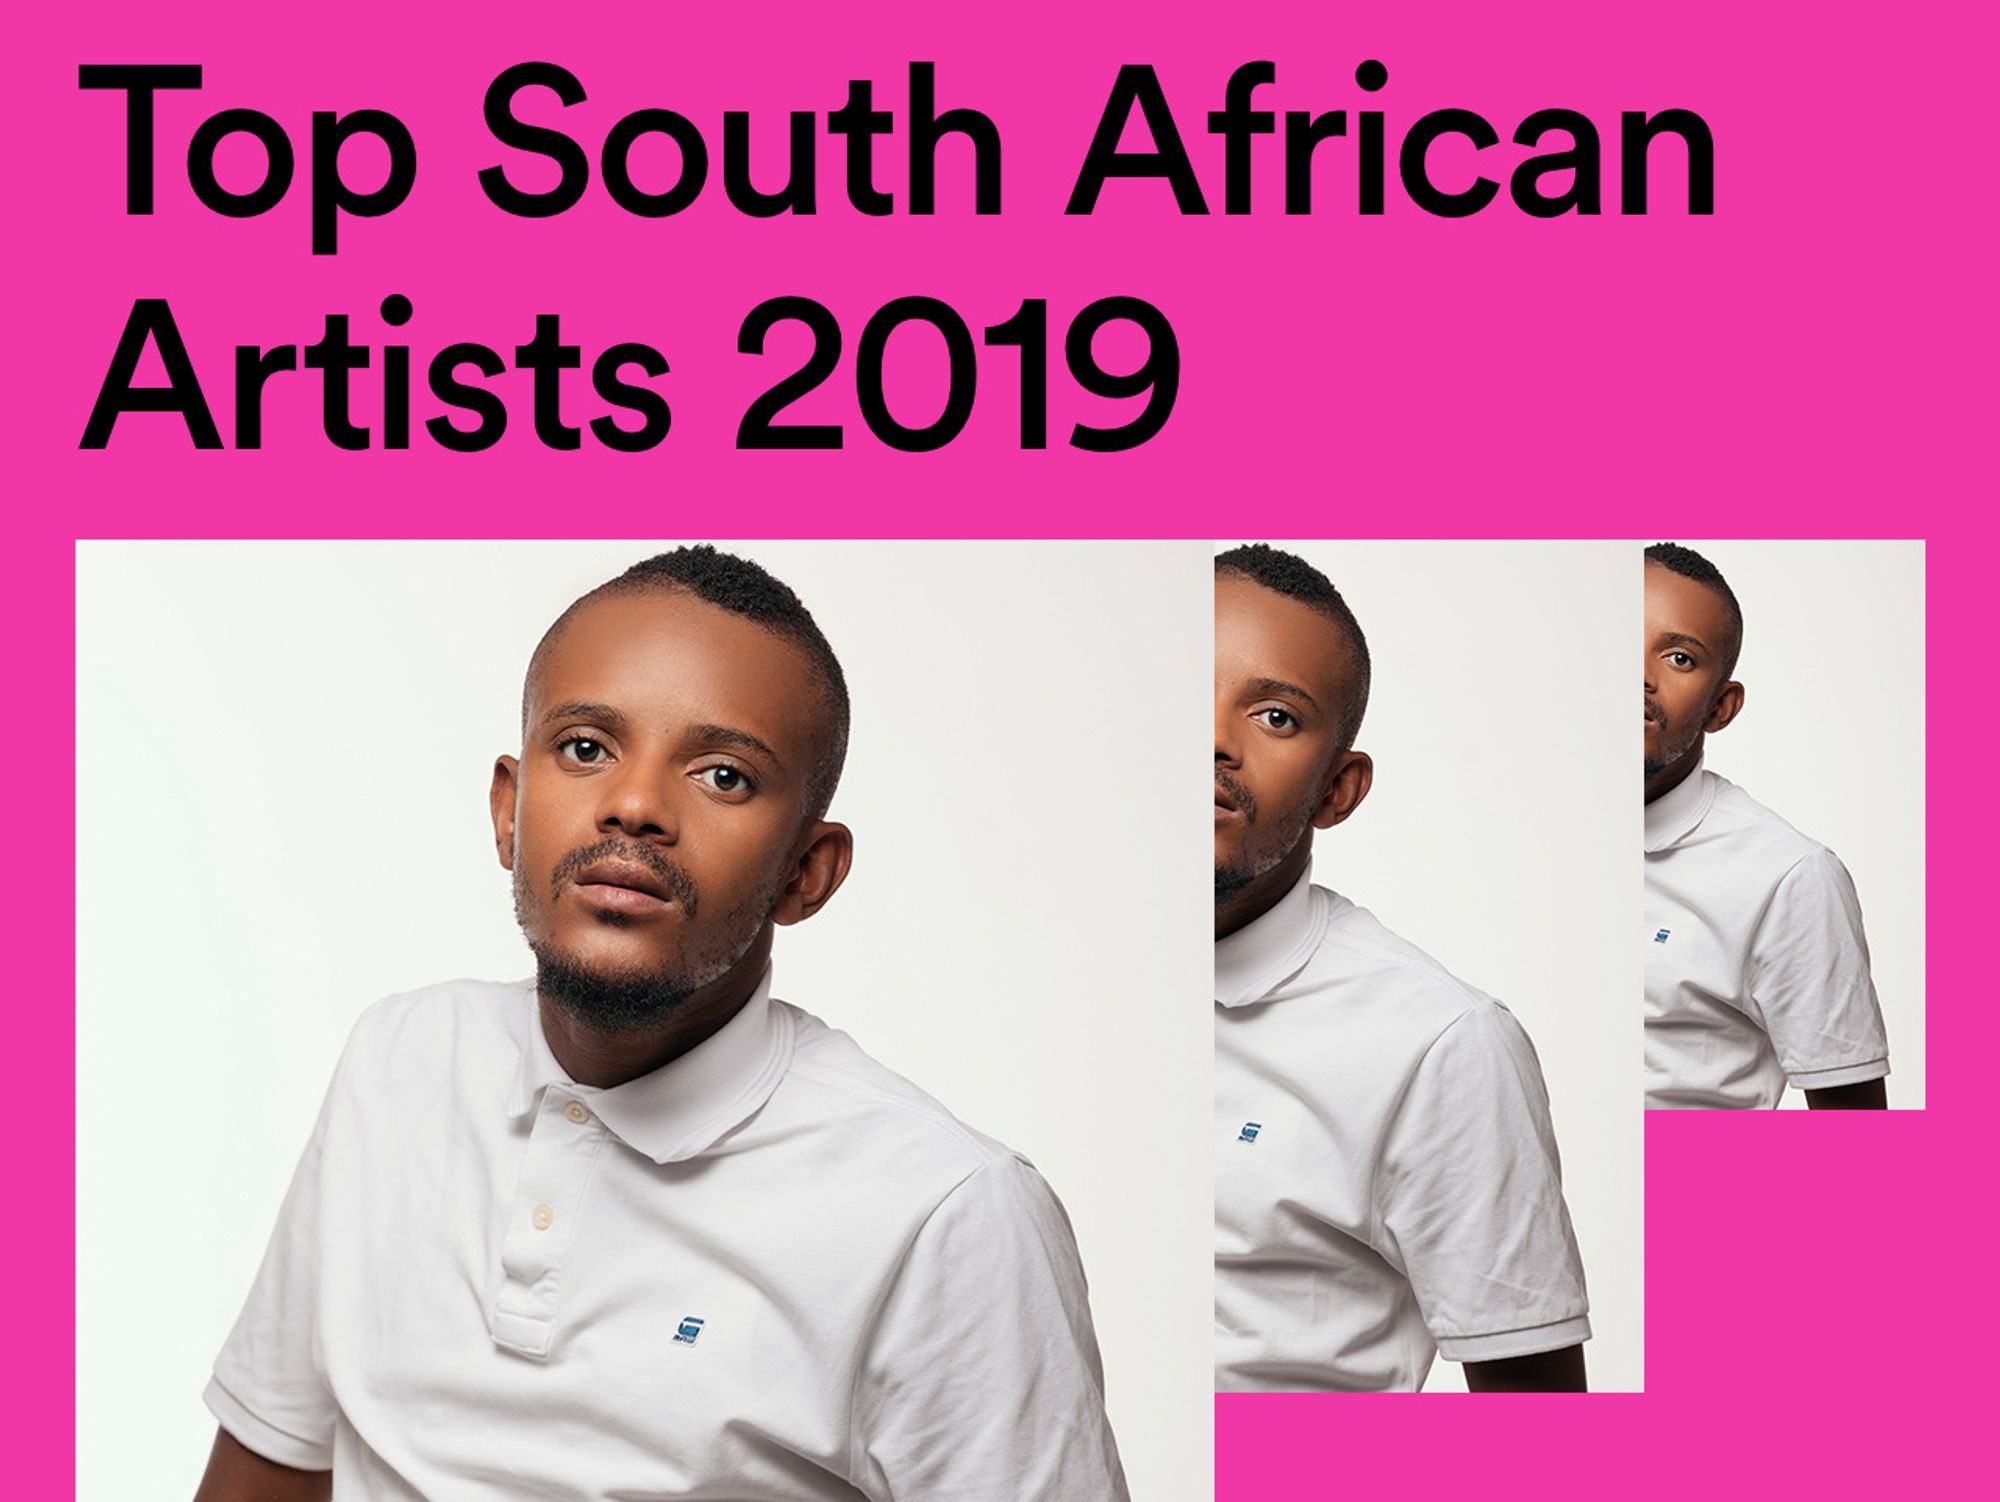 Kabza De Small is 2019’s Most Streamed South African Artist on Spotify by SA Audiences